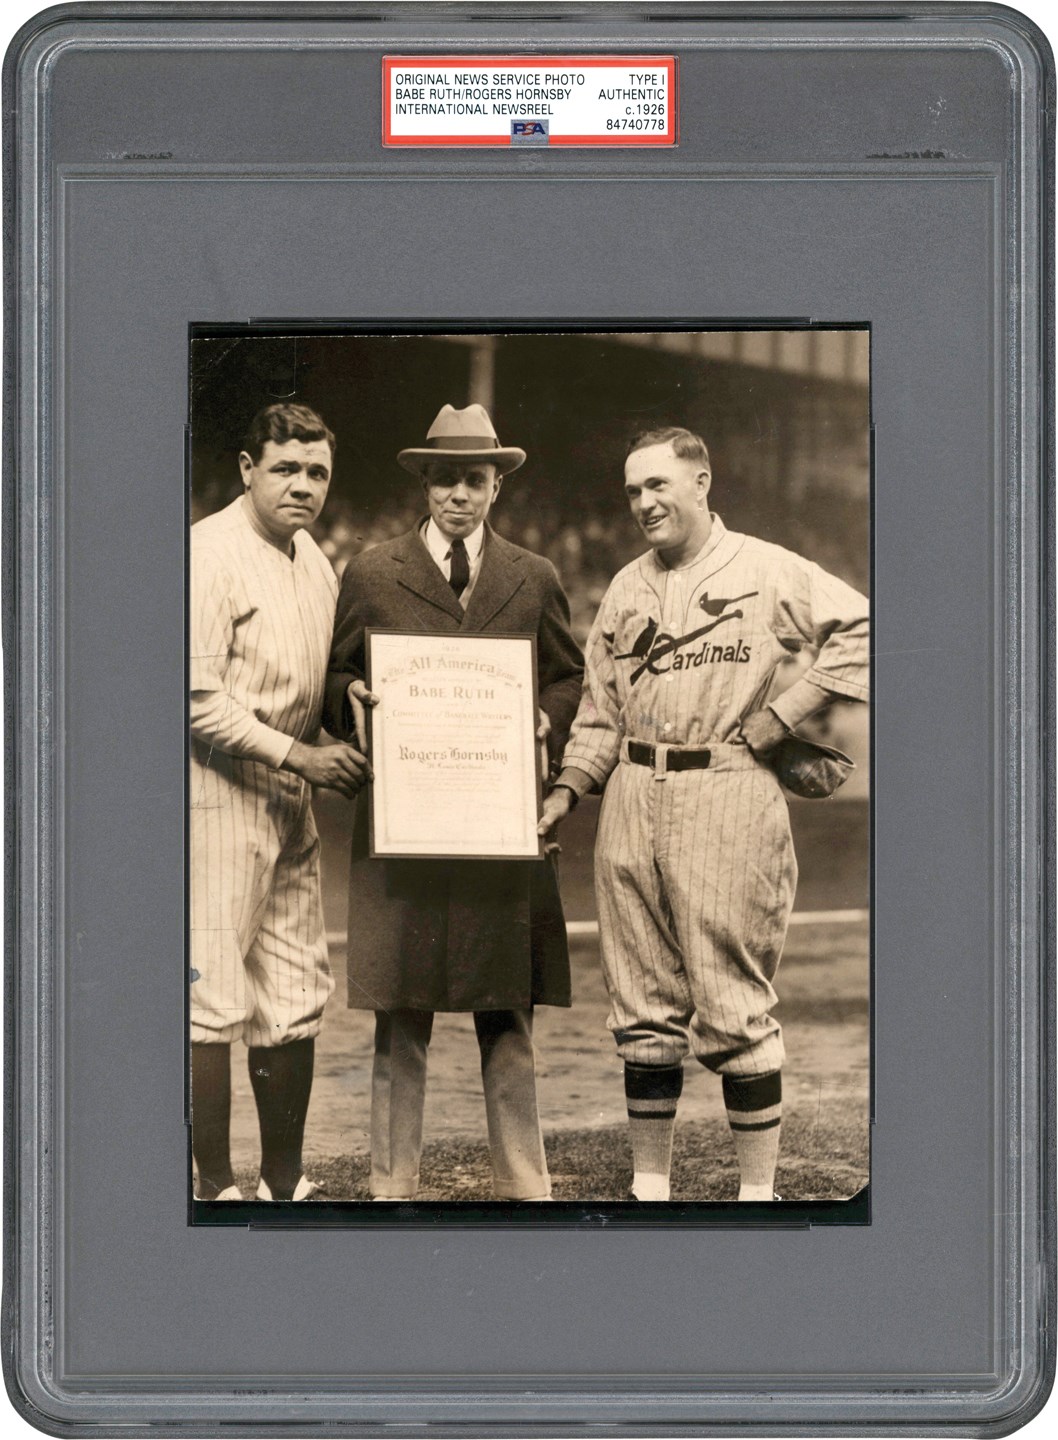 Vintage Sports Photographs - Babe Ruth & Rogers Hornsby 1926 World Series Photograph (PSA Type I)